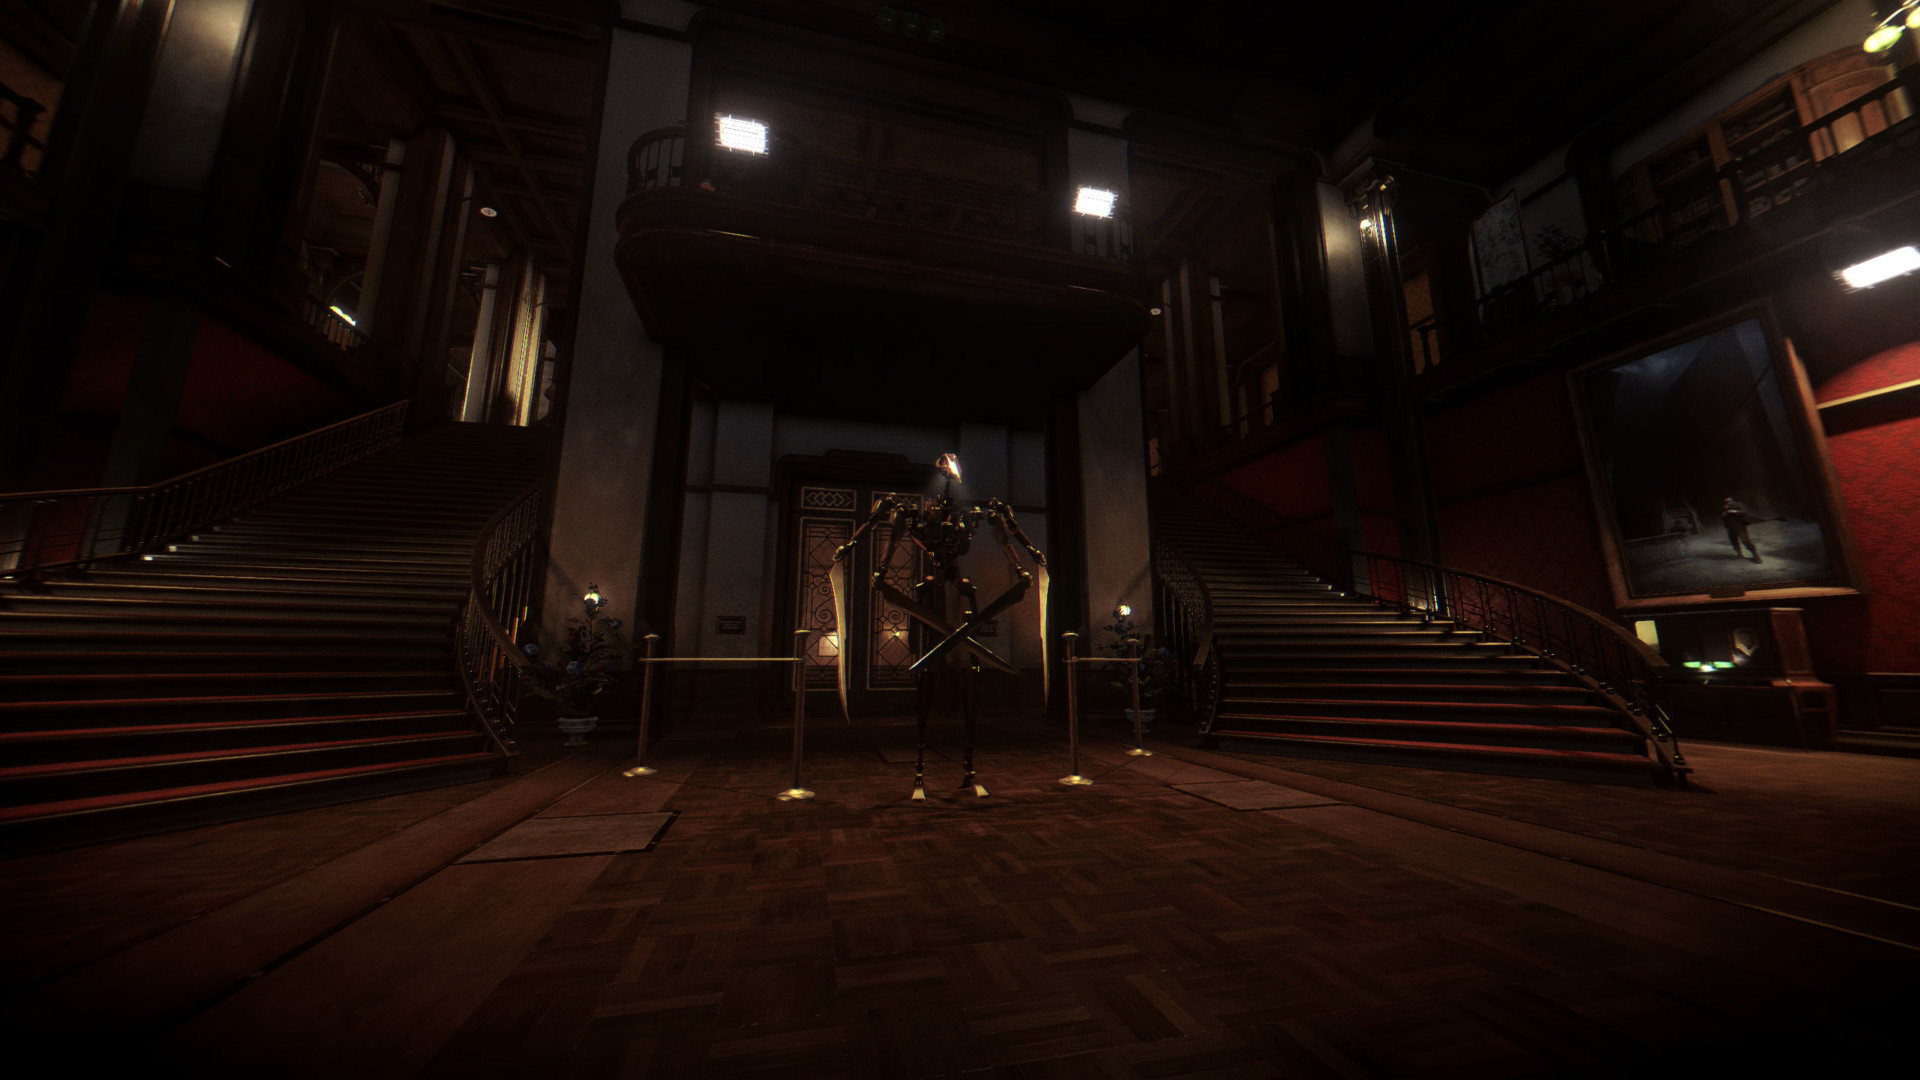 Dishonored 2 GAME MOD Arkane ReShade v.1.0a - download